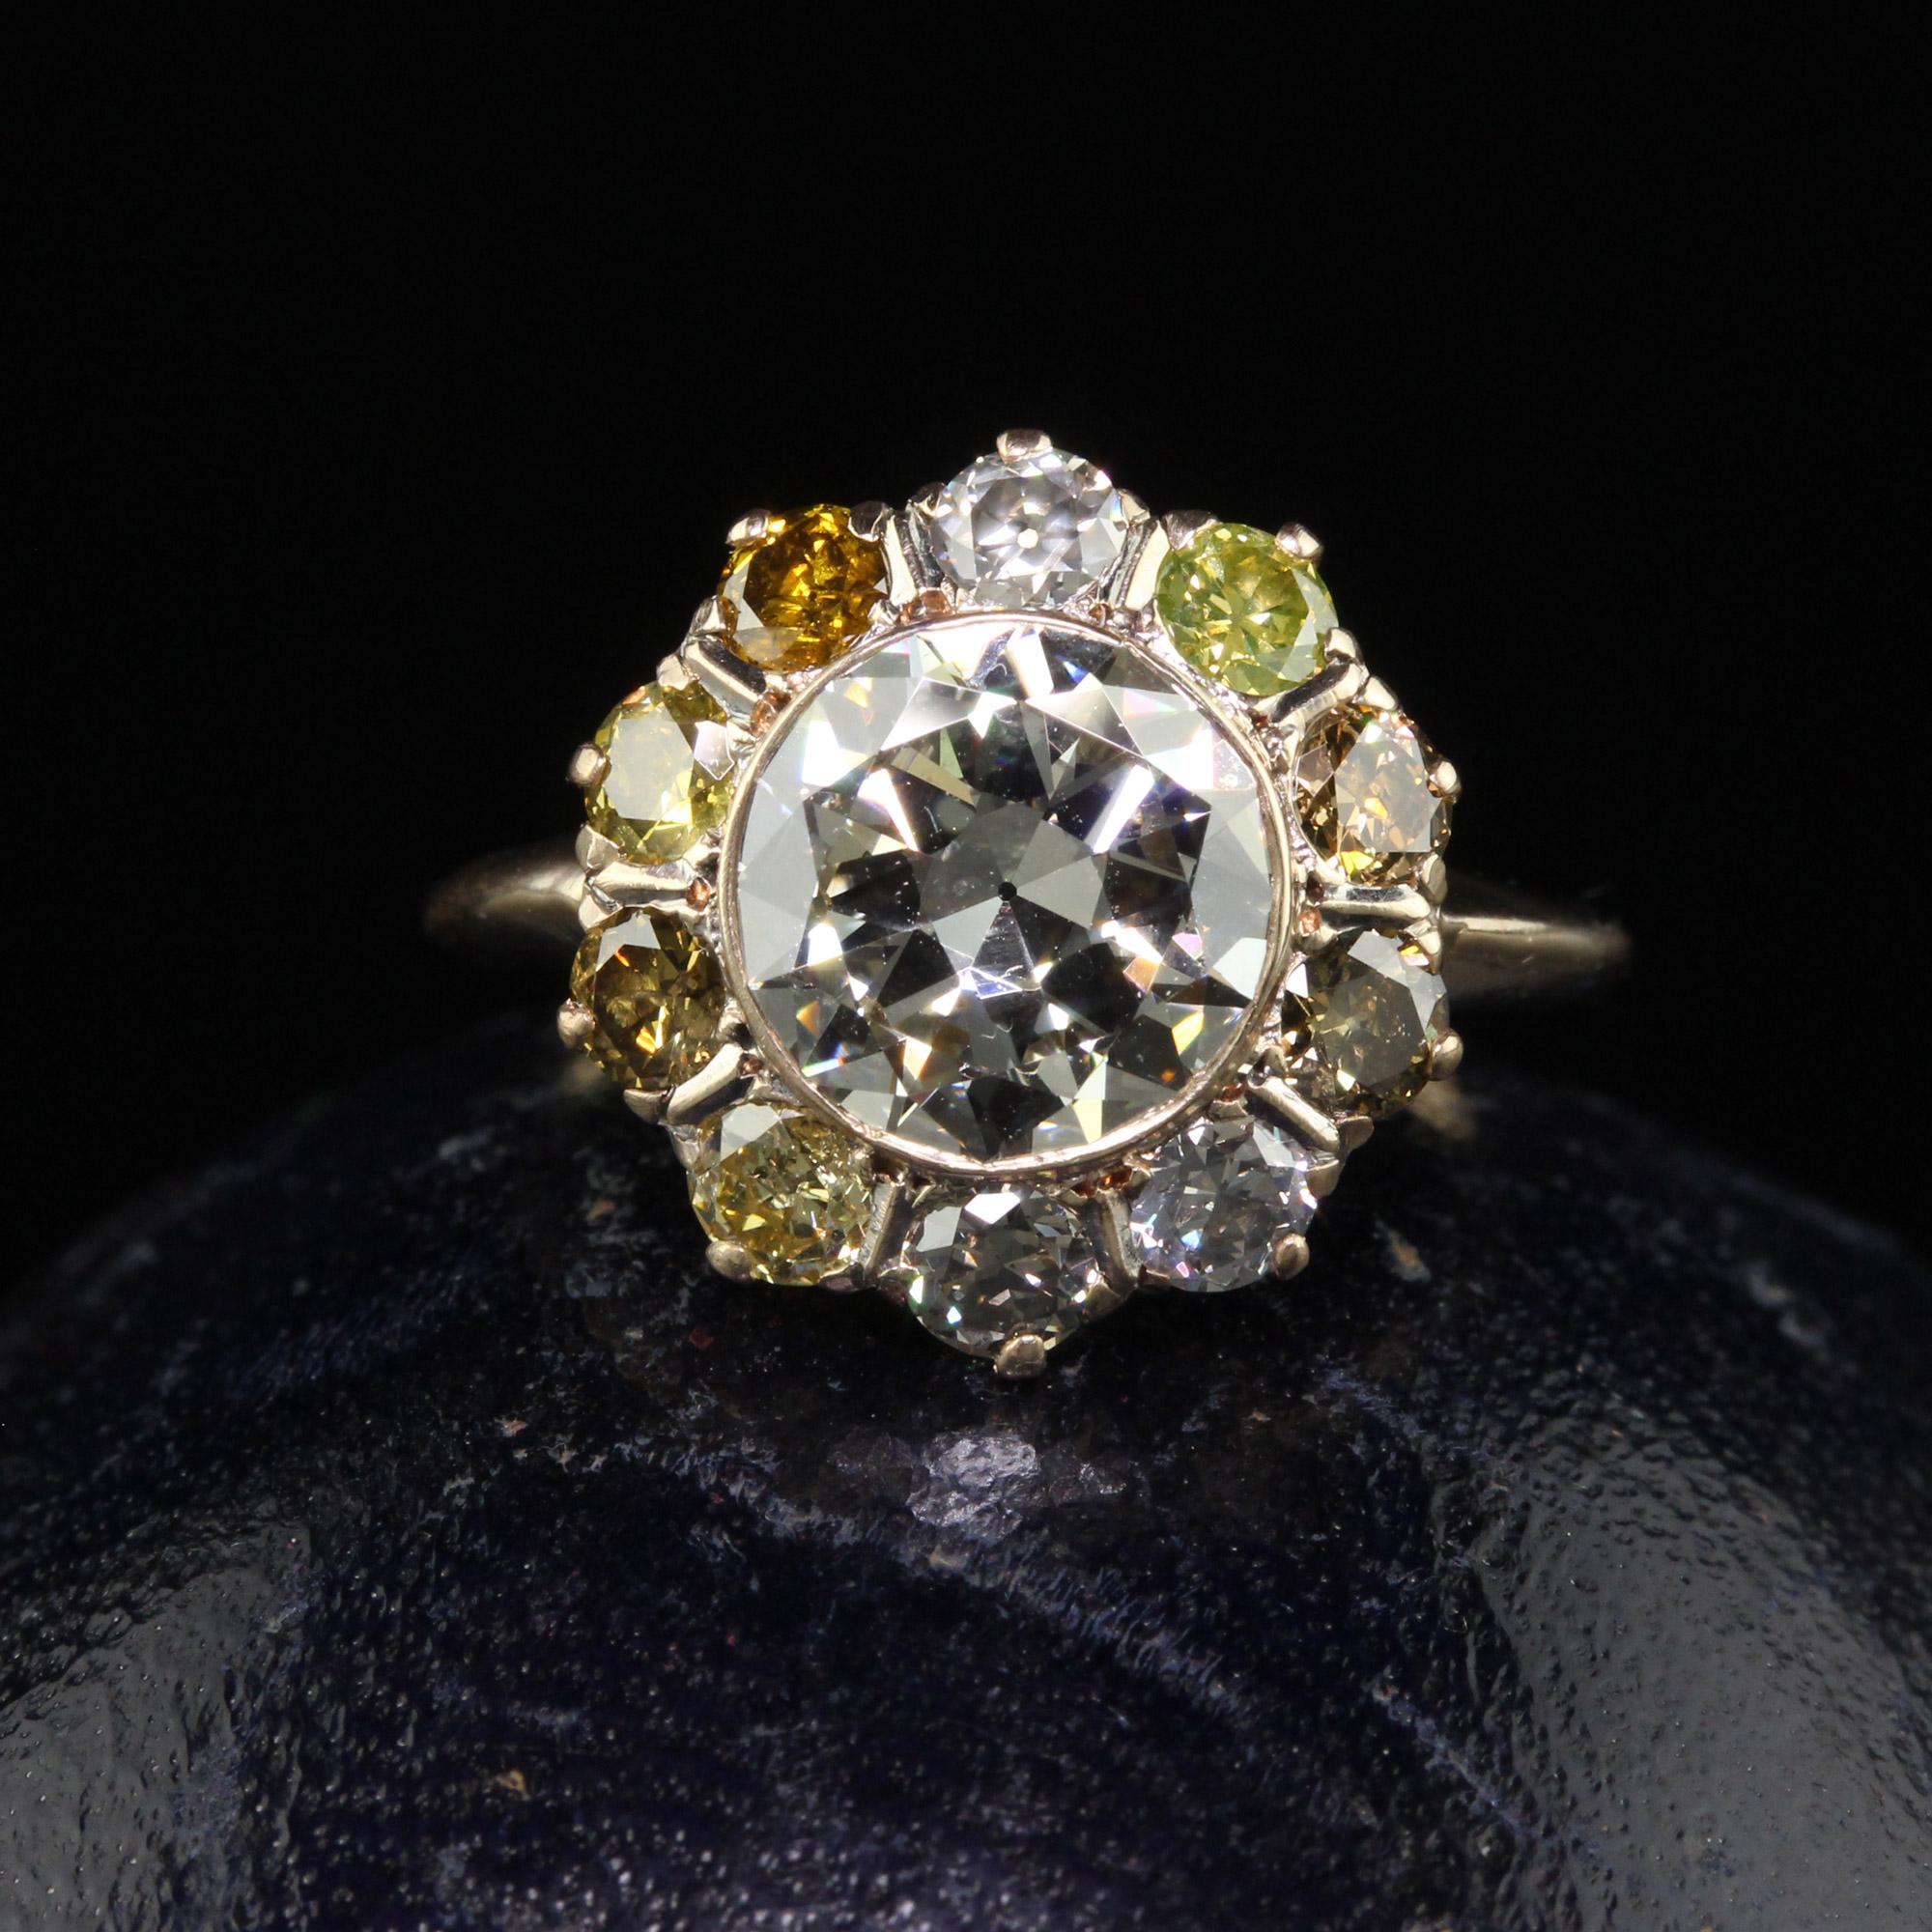 Beautiful Antique Art Deco 14K Yellow Gold Old Euro Fancy Color Halo Diamond Engagement Ring - GIA. This incredible engagement ring is crafted in 14k yellow gold. The center holds a Old European diamond and is surrounded by fancy colored old